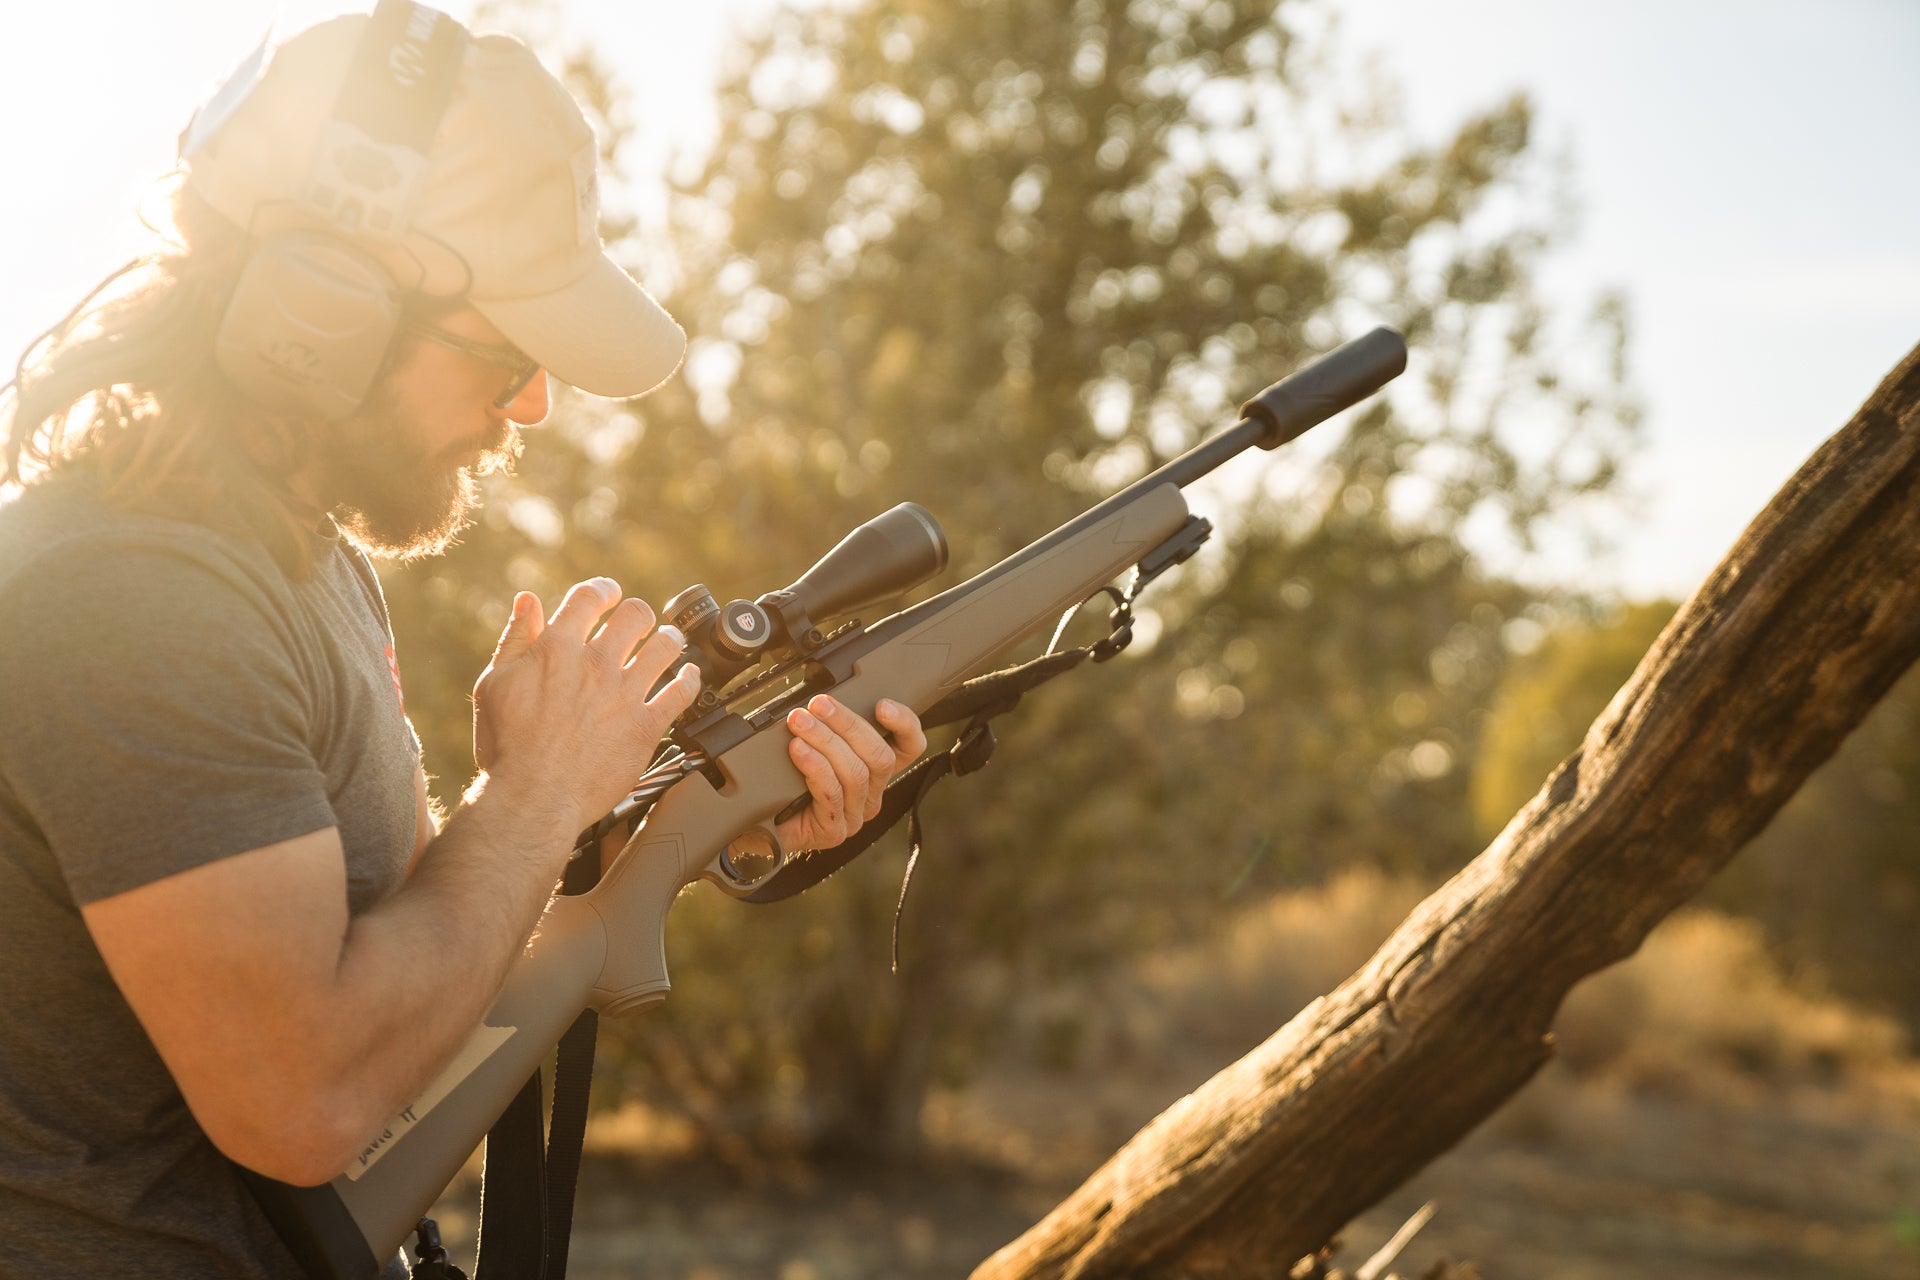 A shooter works the bolt of a suppressed Mossberg rifle.